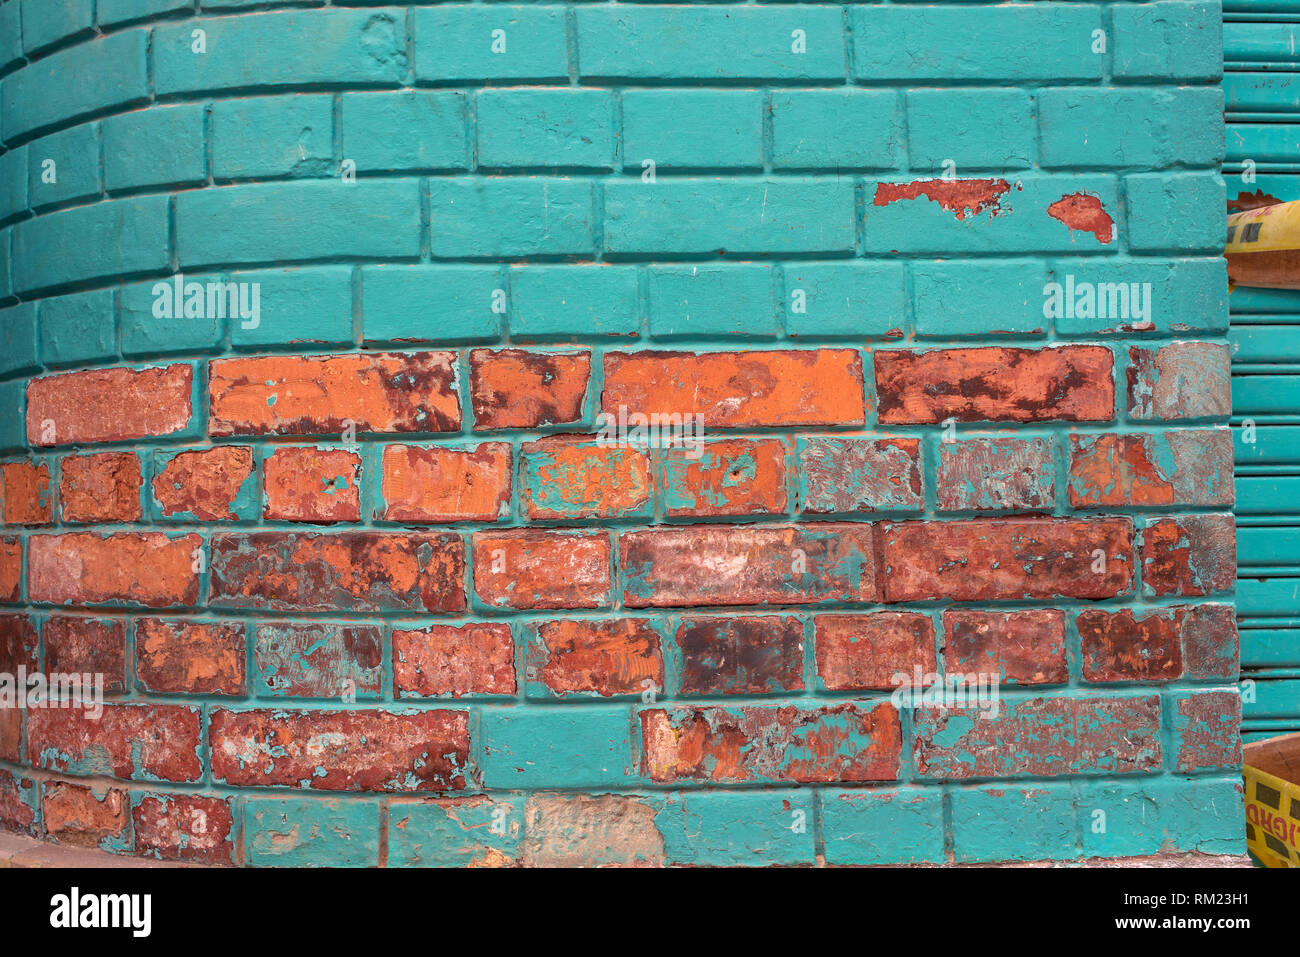 Colourful wall surface with exposed bricks texture and turquoise paint. Urban details for backdrop, wallpaper, RF. La Candelaria, Bogota, Colombia Stock Photo